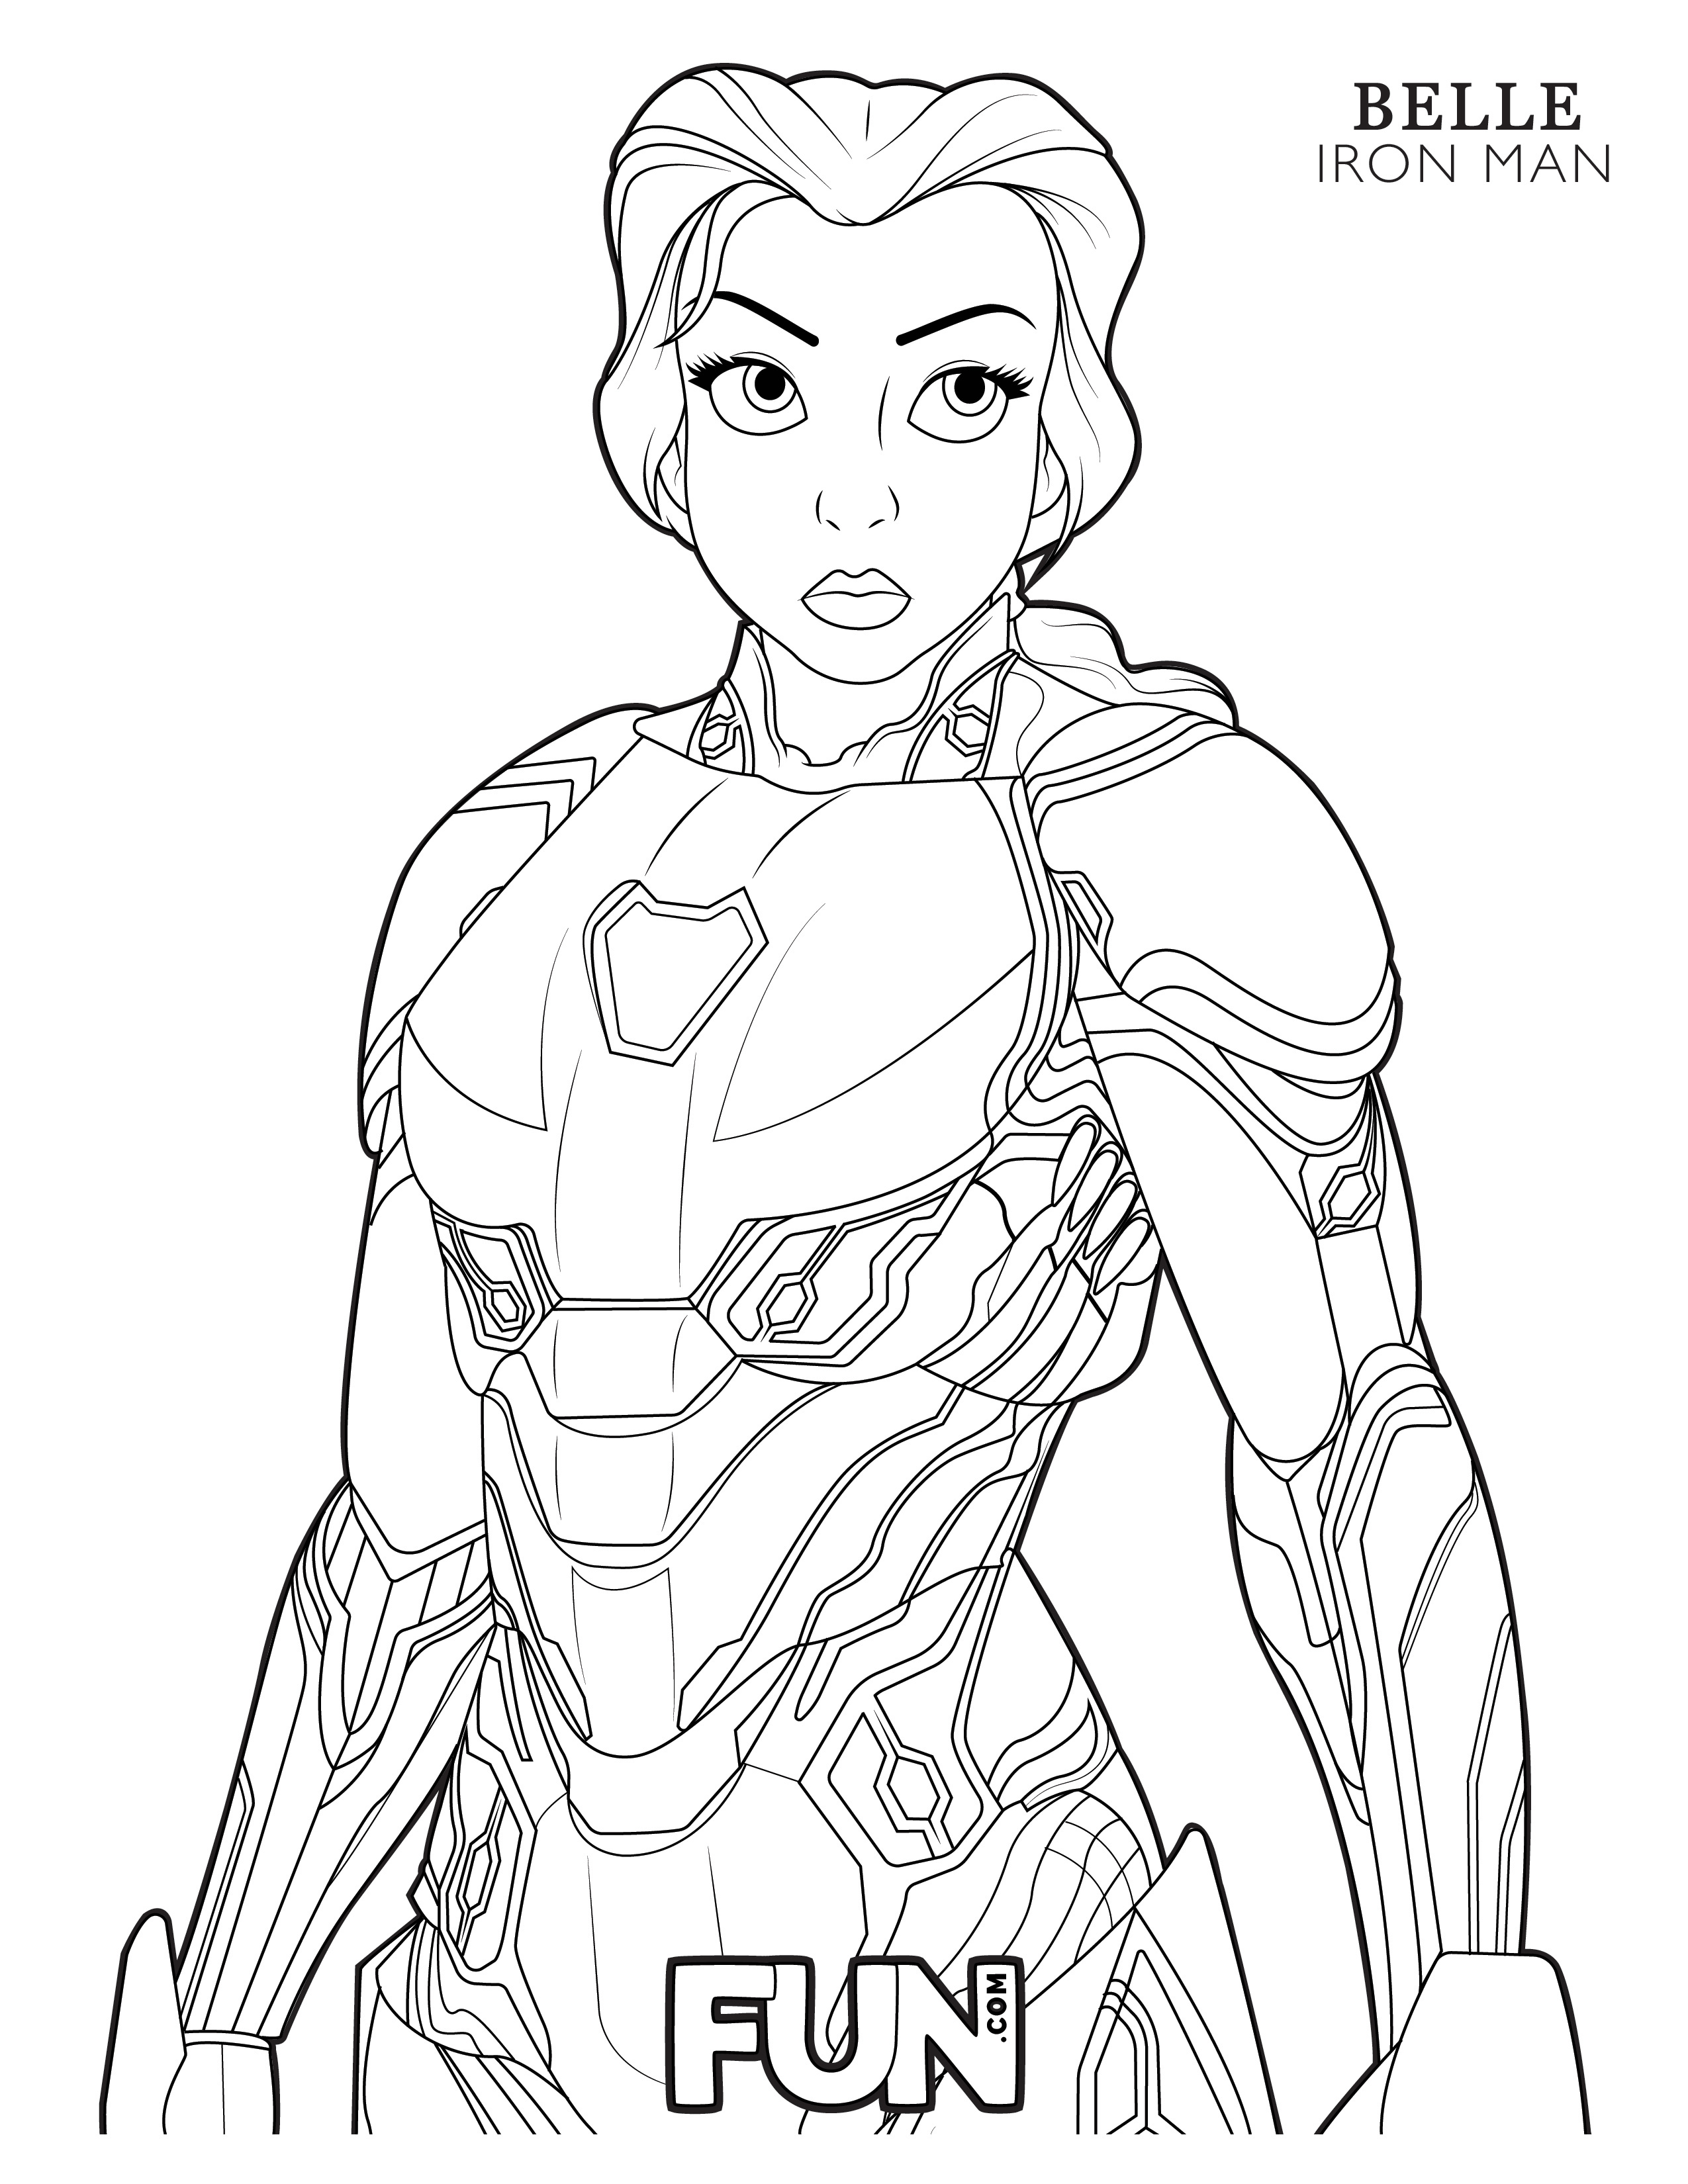 Belle Iron Man Coloring Page